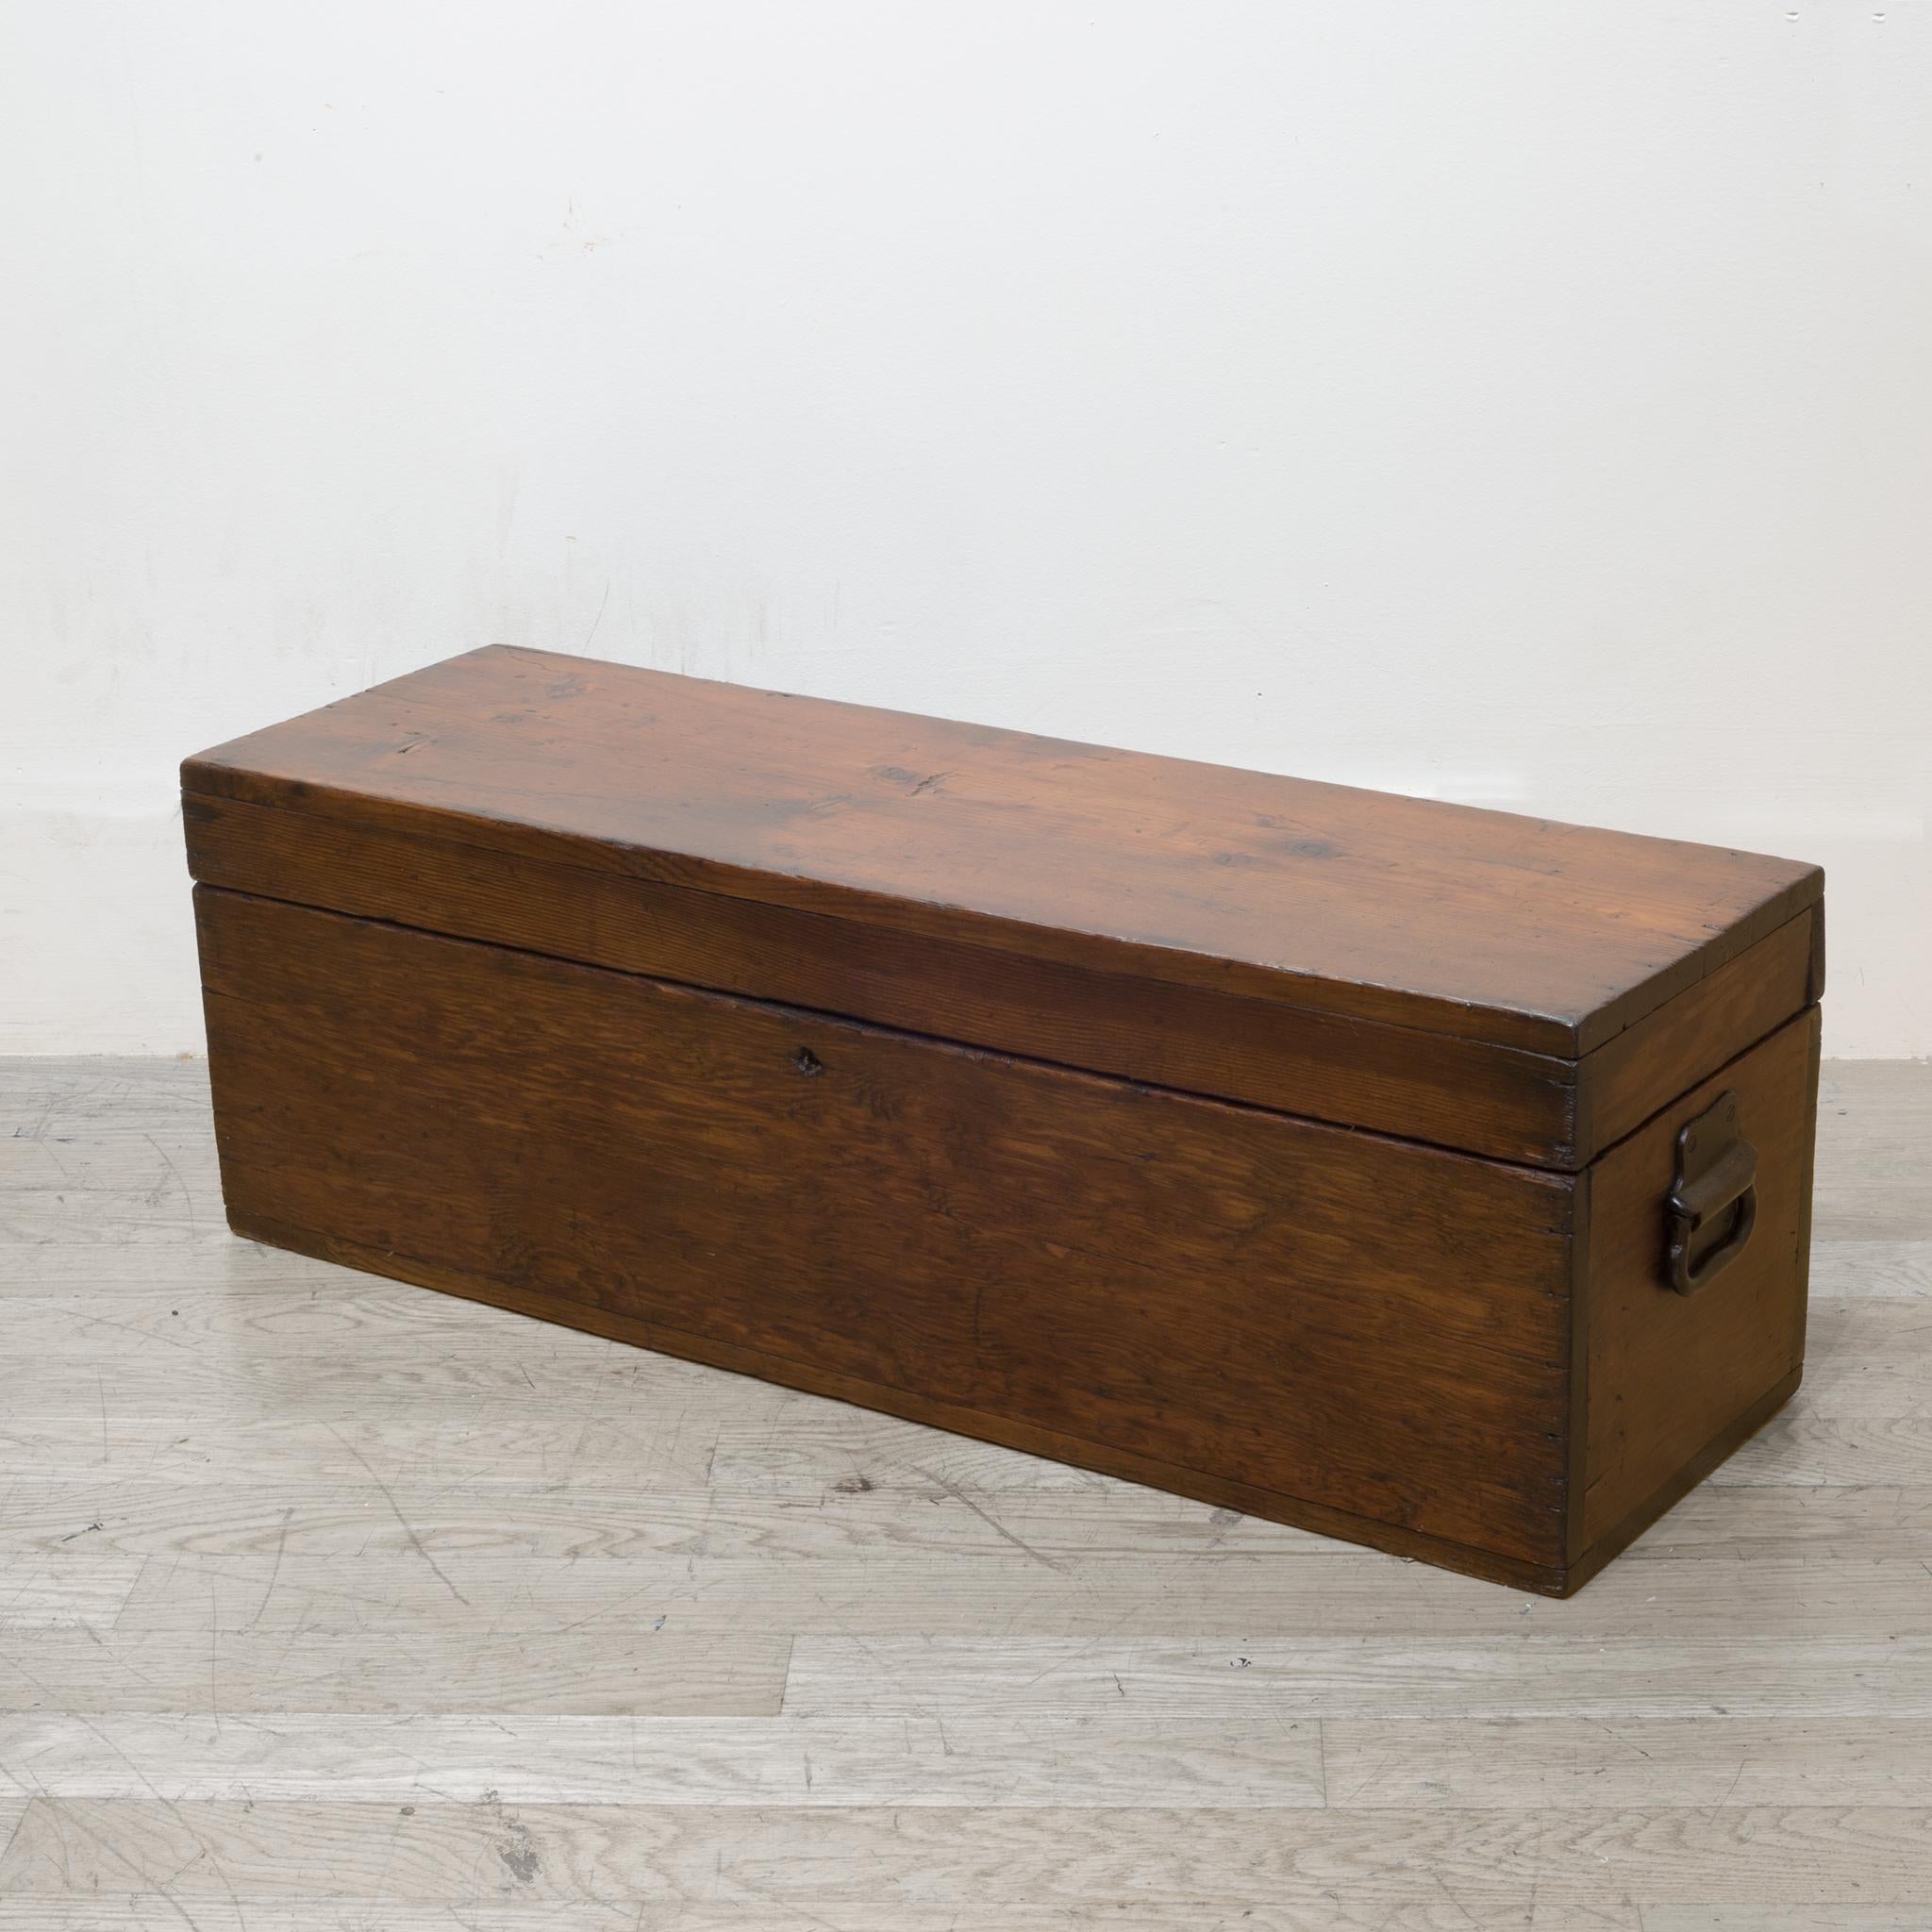 About

This is a handmade wooden chest with steel handles. Refinished in an oil and wax finish.

Creator: Unknown.
Date of manufacture: circa 1940.
Materials and techniques: Douglas fir, steel.
Condition: Good. Wear consistent with age and